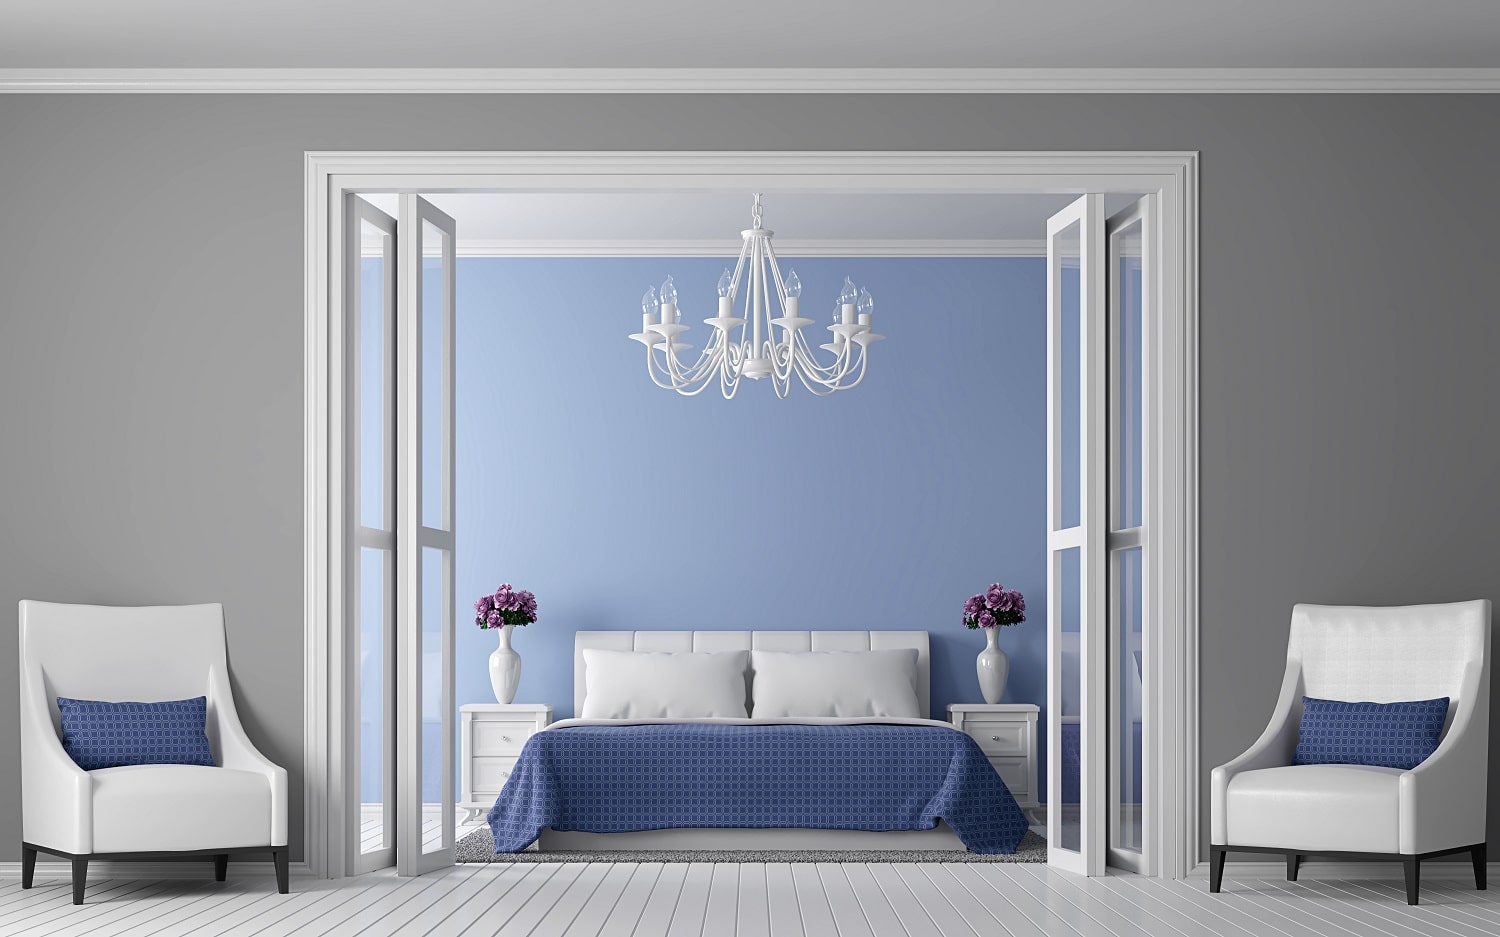 How to Choose the Right Paint Color for Your Bedroom